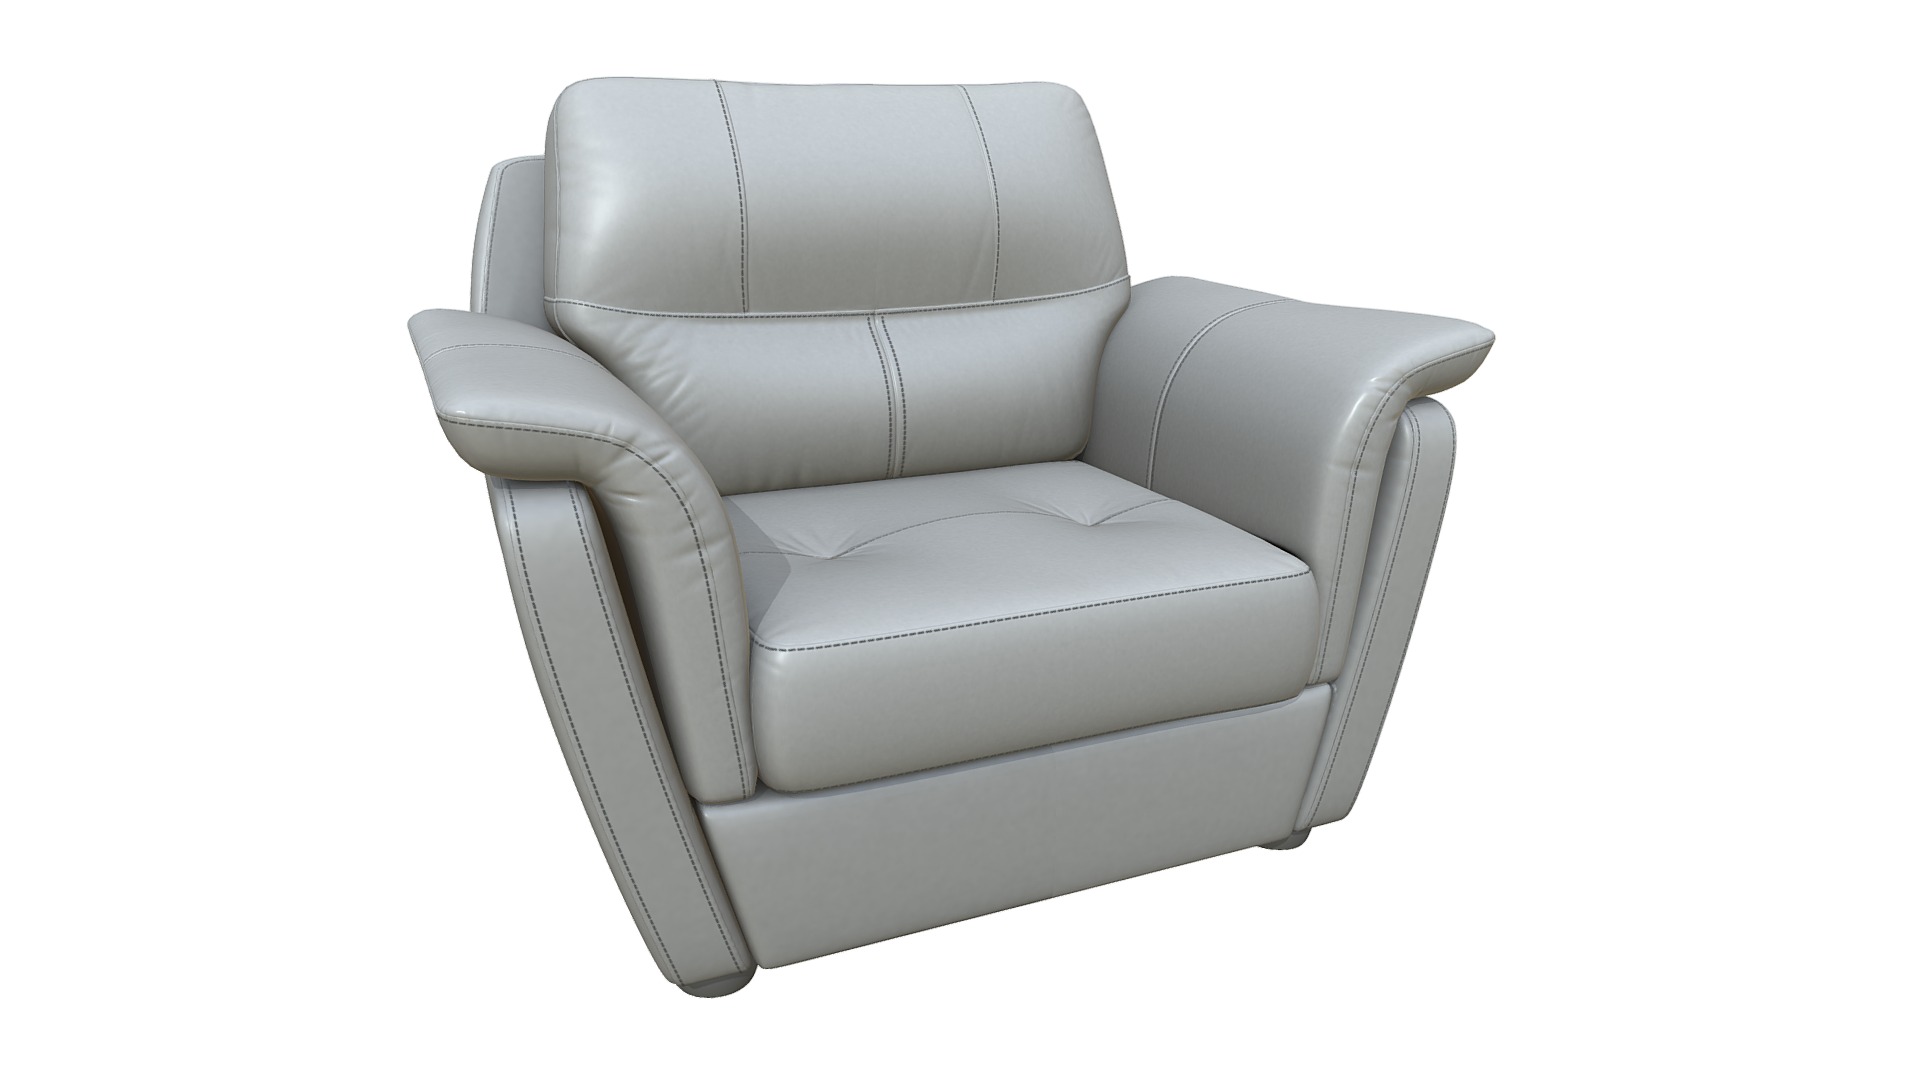 3D model Hoff Melburn - This is a 3D model of the Hoff Melburn. The 3D model is about a grey leather chair.